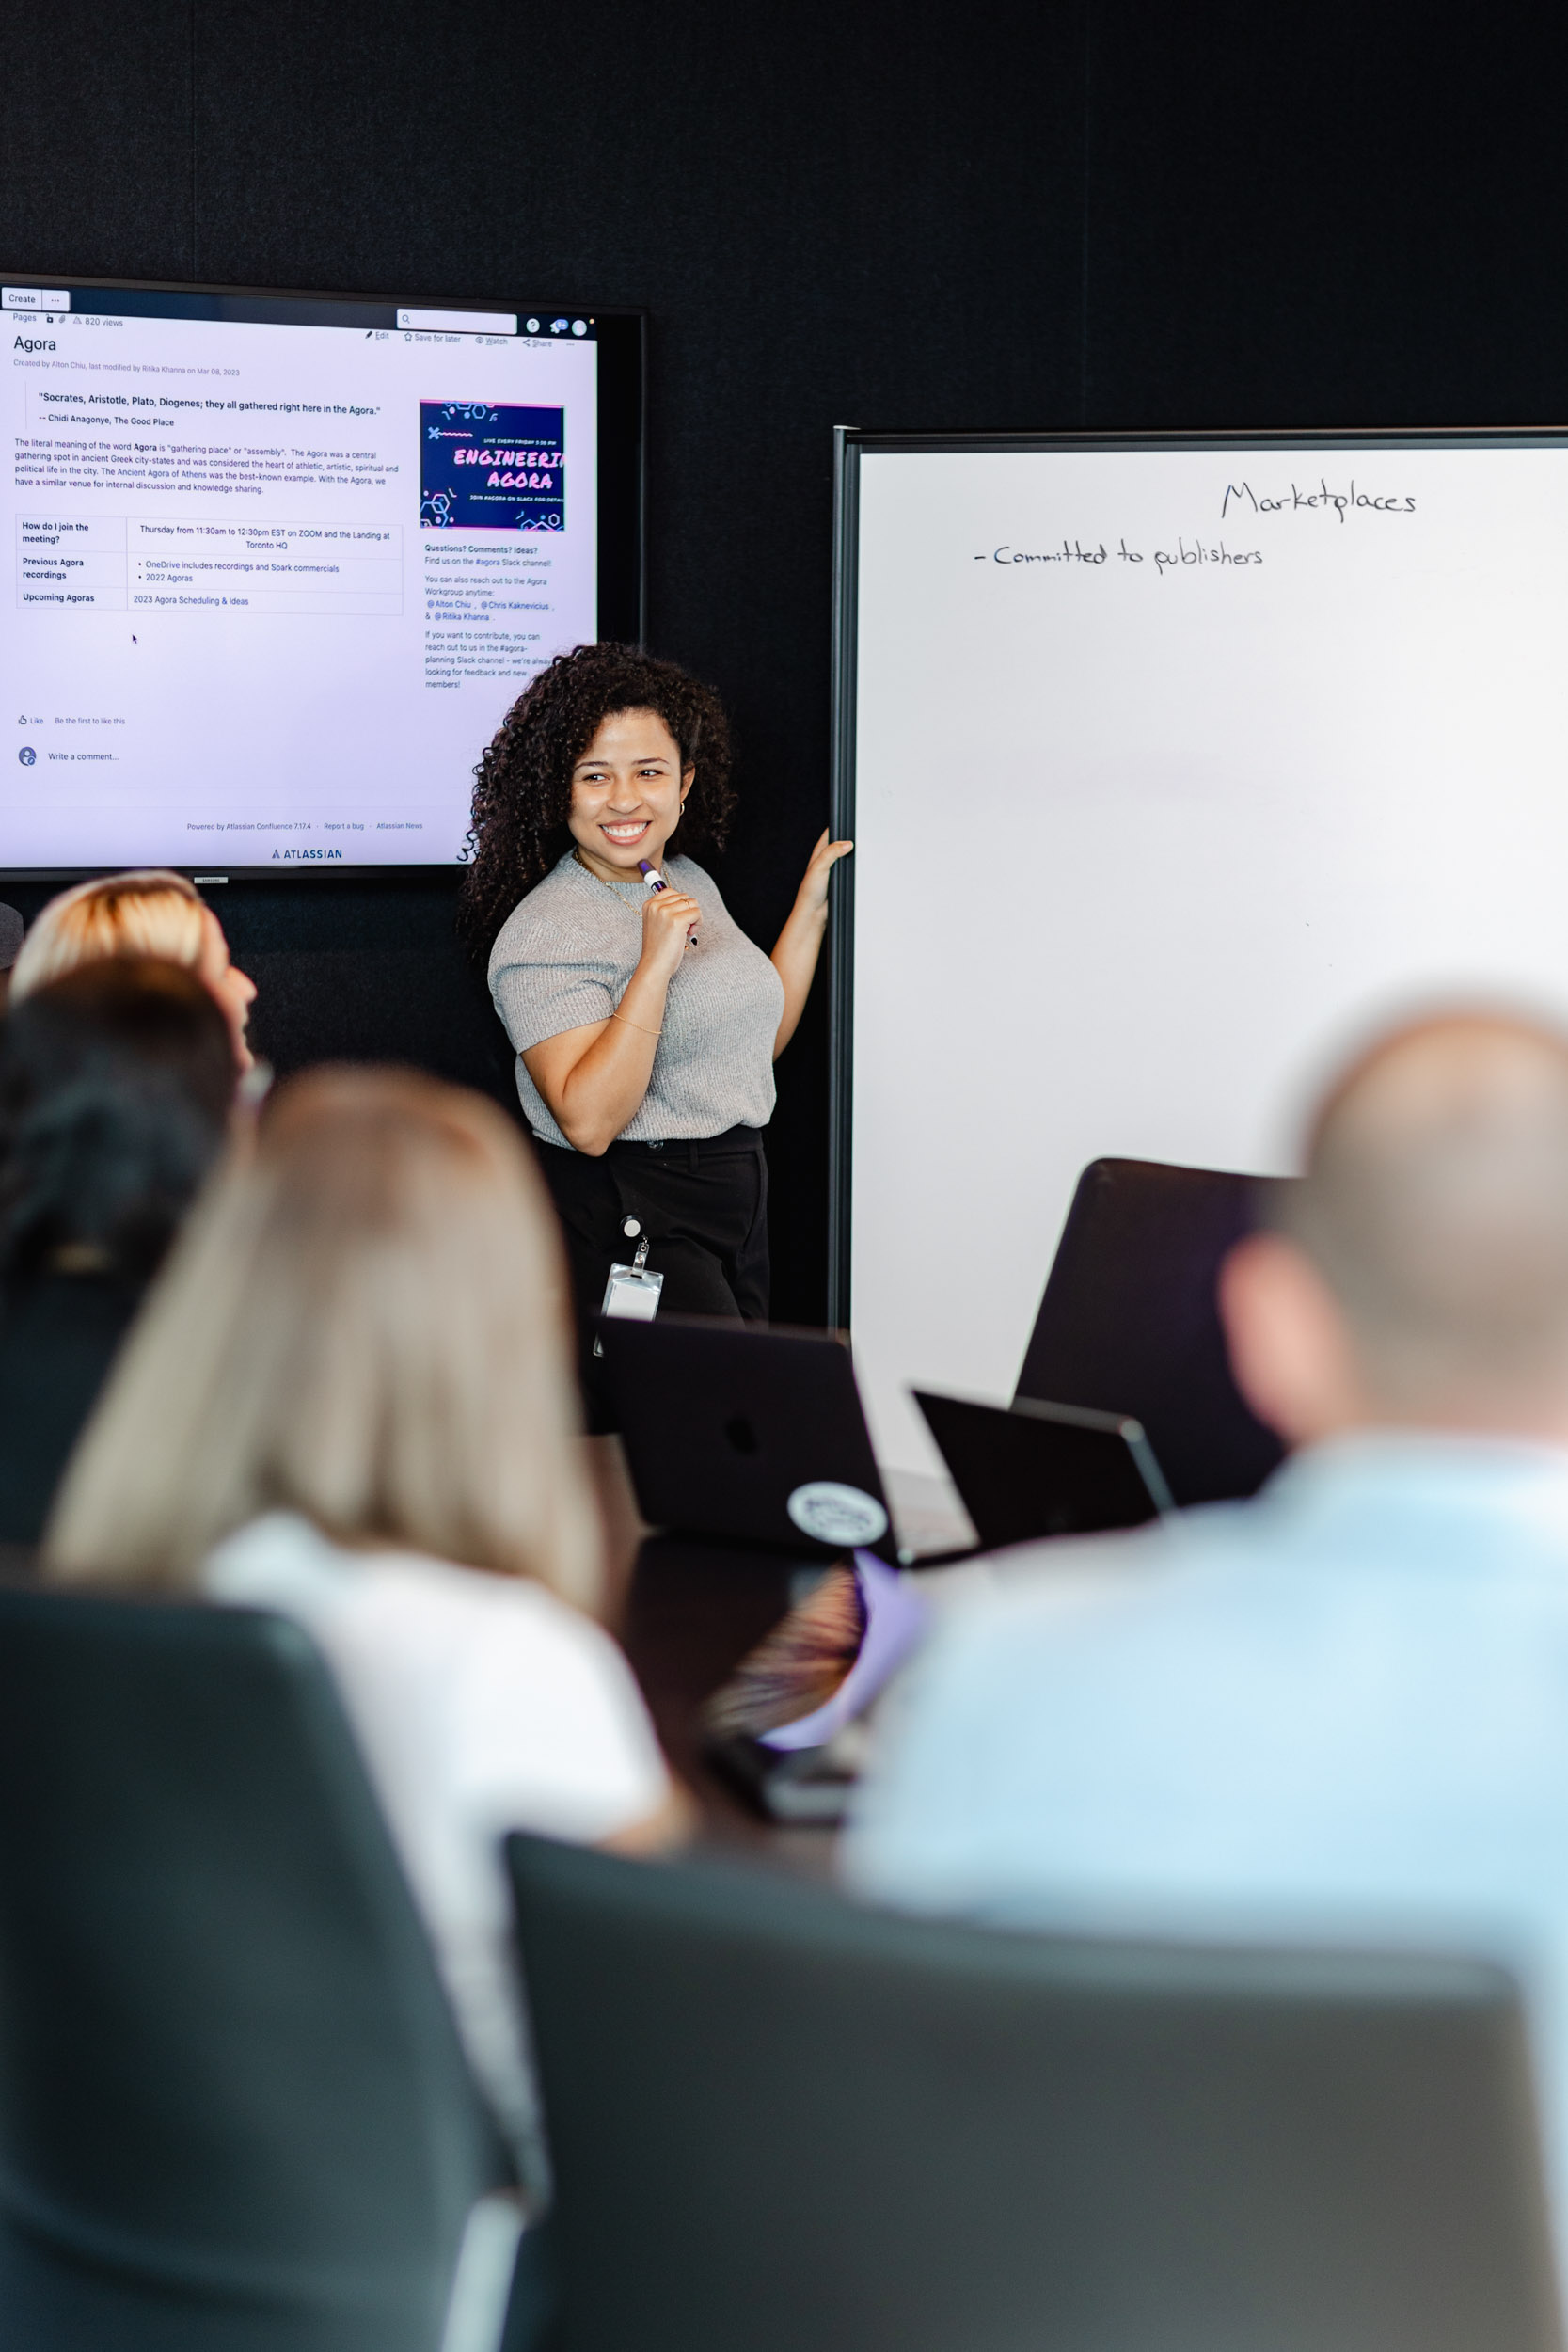 A woman presenting at a conference room during an Index Exchange event.